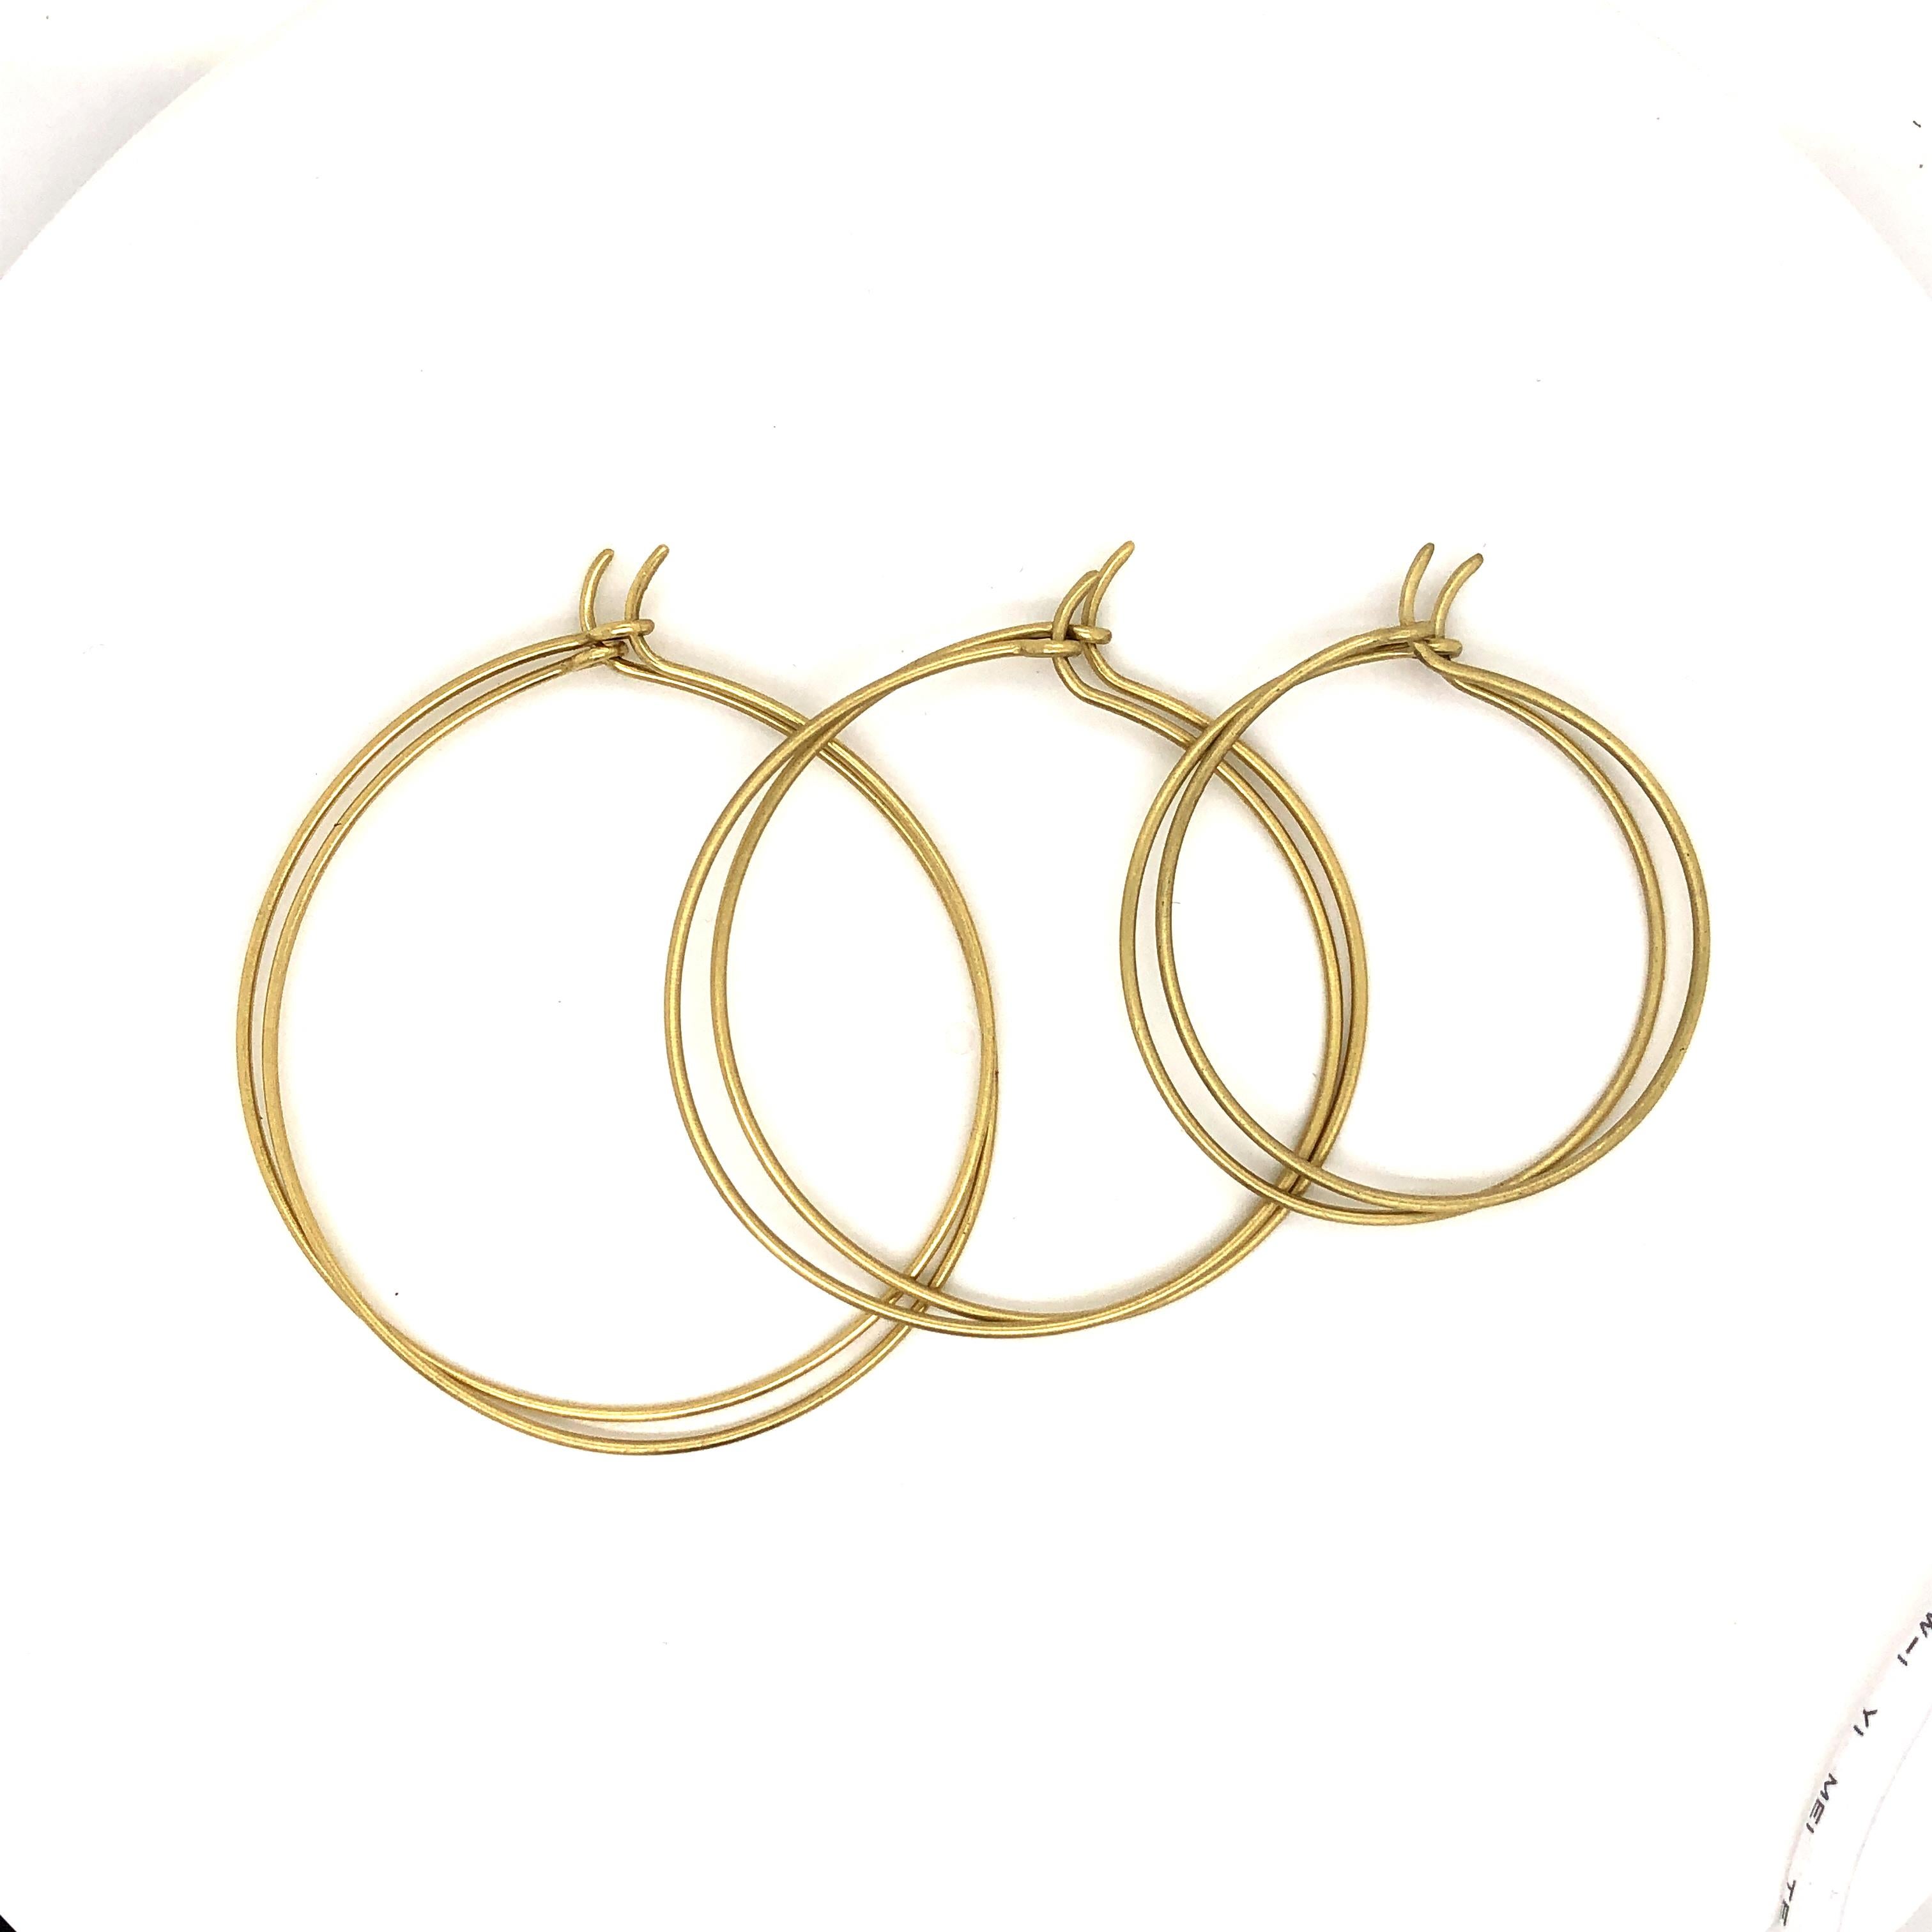 Contemporary Faye Kim 18 Karat Gold Wire Hoops with Trillion Diamond Drops For Sale